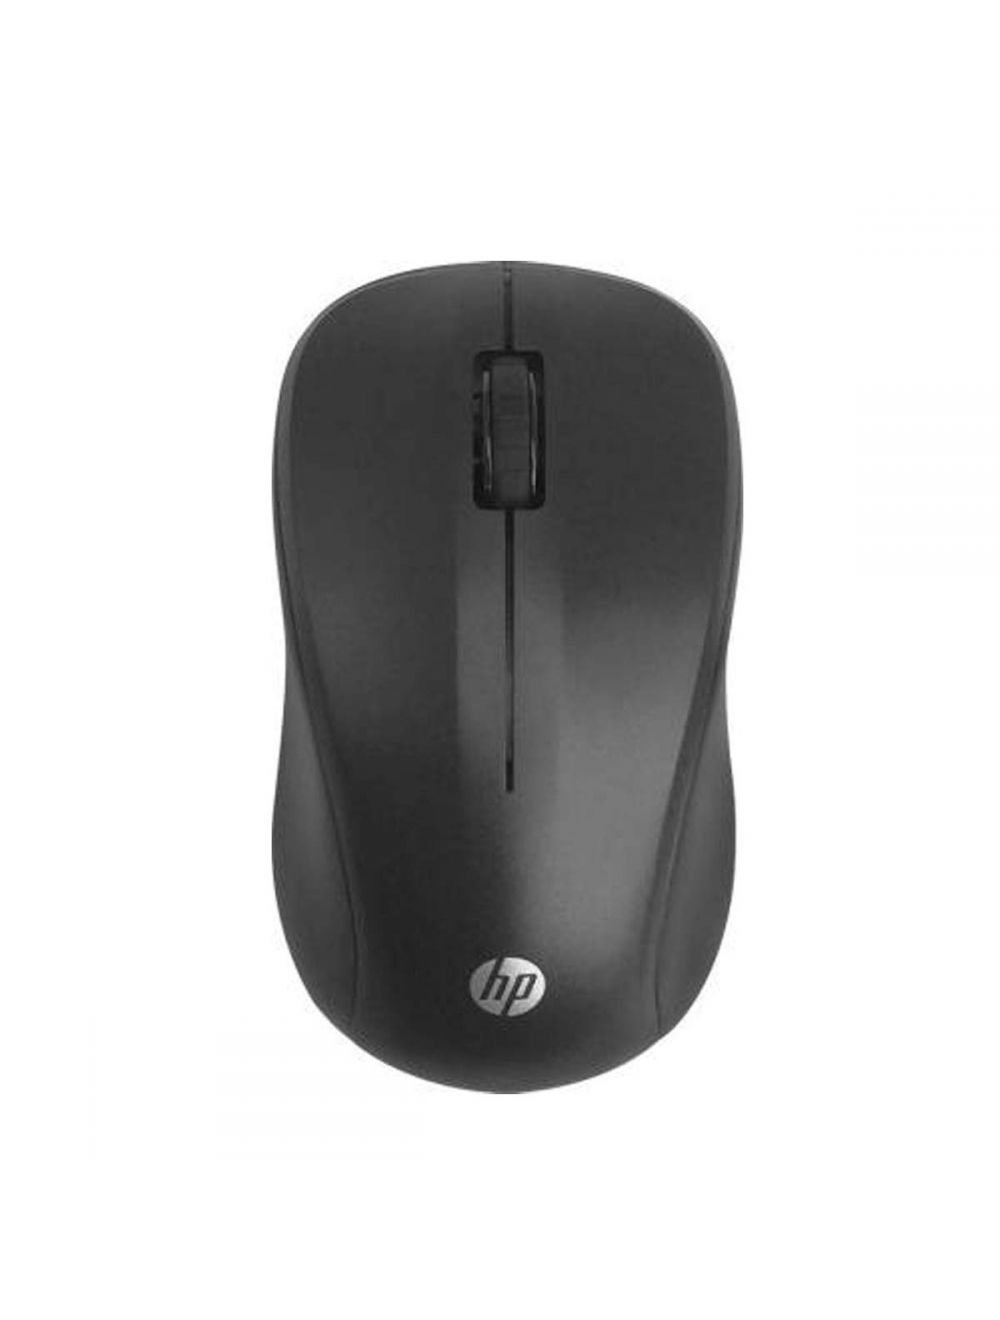 Try & Buy HP S500 Bluetooth Wireless Mouse (Black)